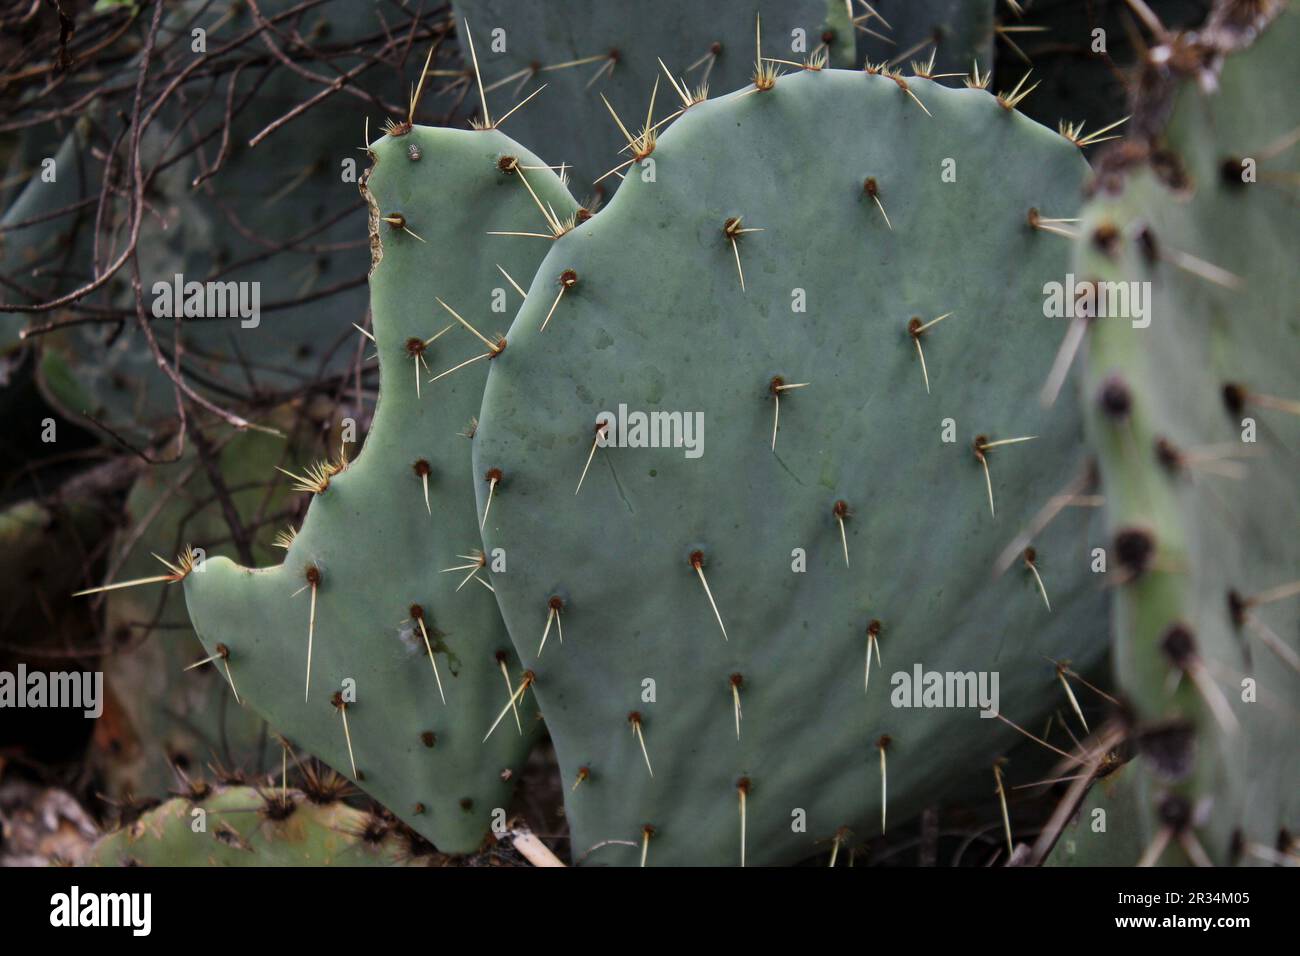 The Personality of a Cactus Stock Photo